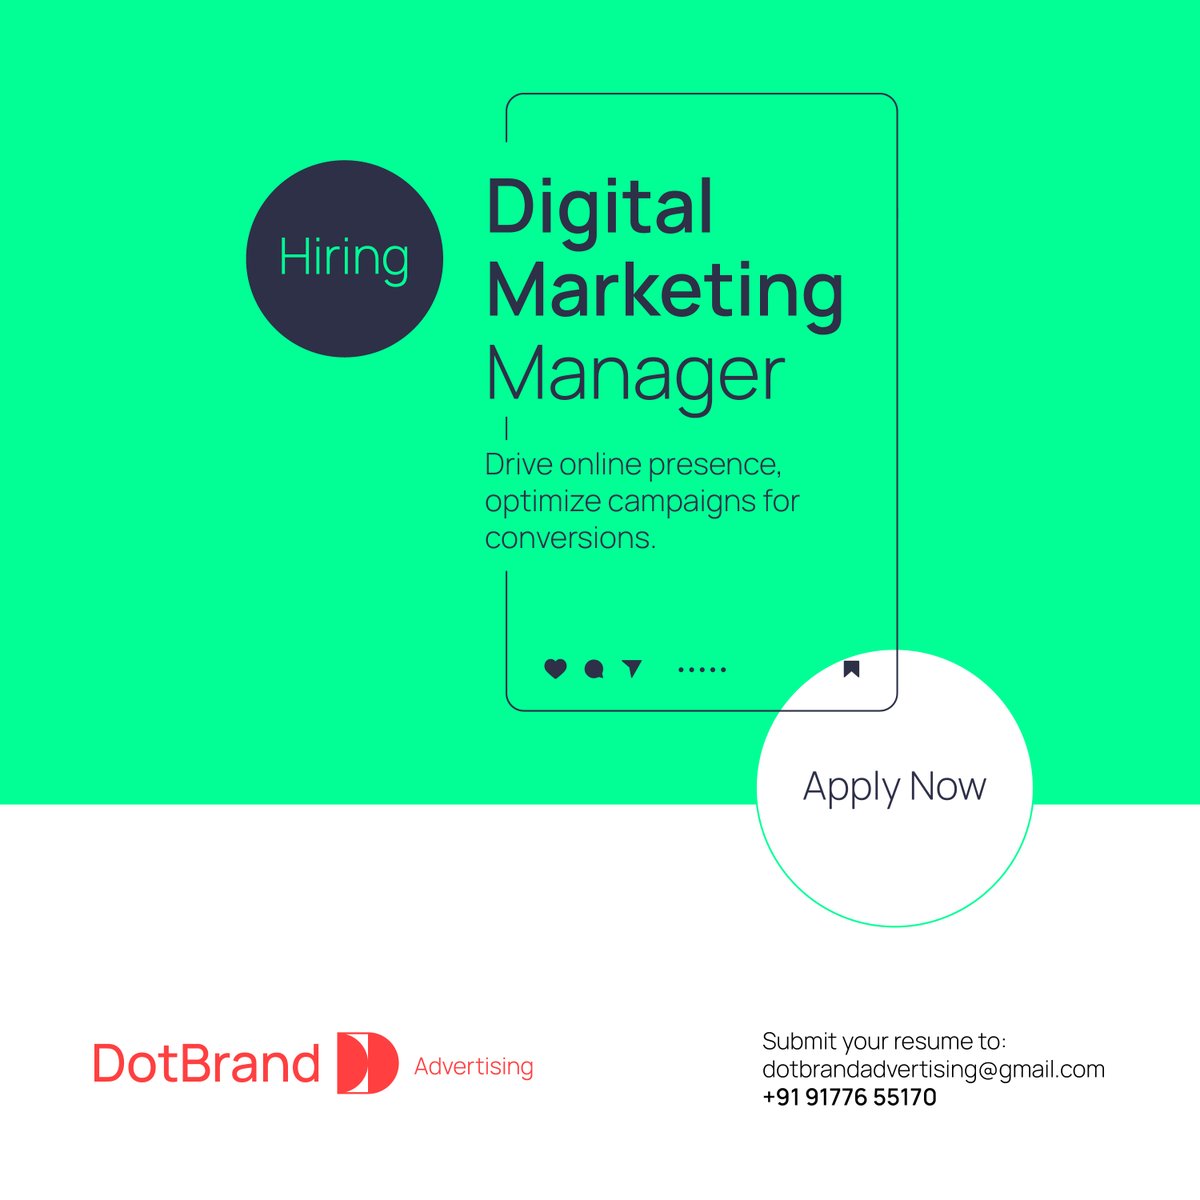 ✨ Join our team as a Digital Marketing Manager in the vibrant city of Hyderabad! 🌆

Work from office
Full -time
2 yr experience

Please share your CV or portfolio with us.

Contact: 9177655170
Email : dotbrandadvertising@gmail.com

#DigitalMarketingManager #HyderabadJobs